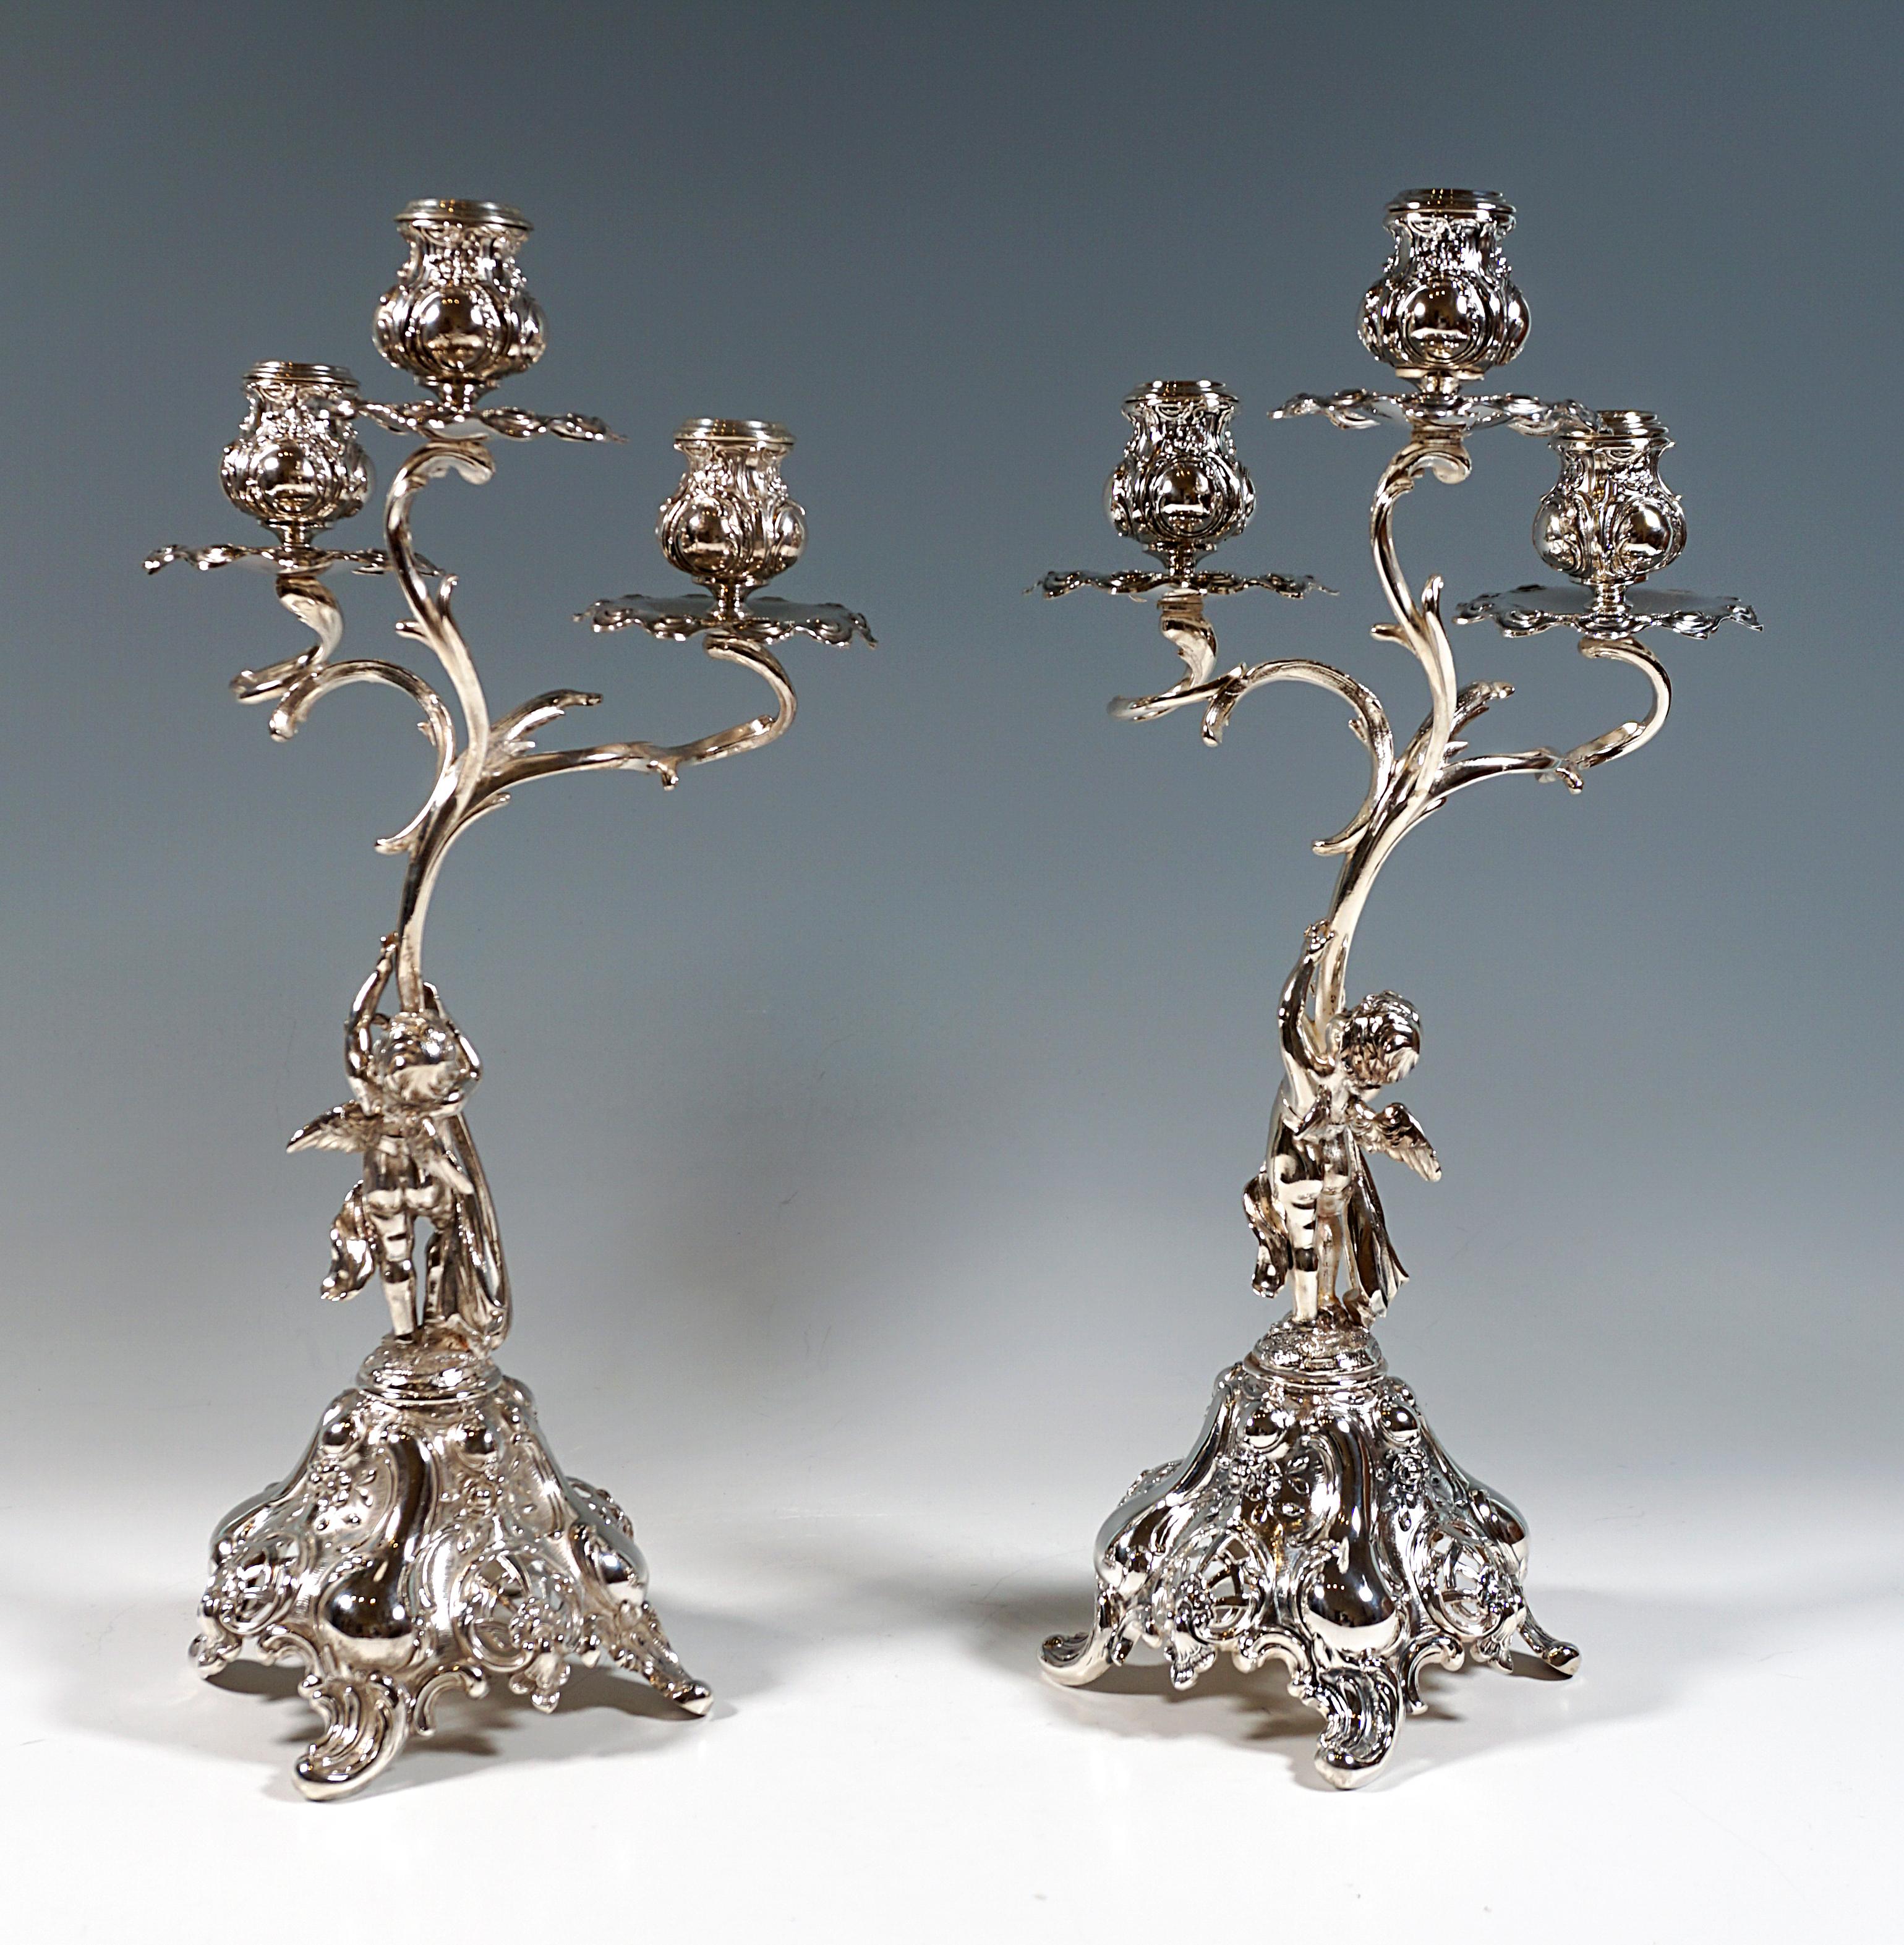 Two decorative, playful Art Nouveau candleholders on a high-towered rocaille and volute base with lattice-like pierced shells, standing on four rocaille feet in a square arrangement, on top of which are raised slender, intertwined volutes, each held